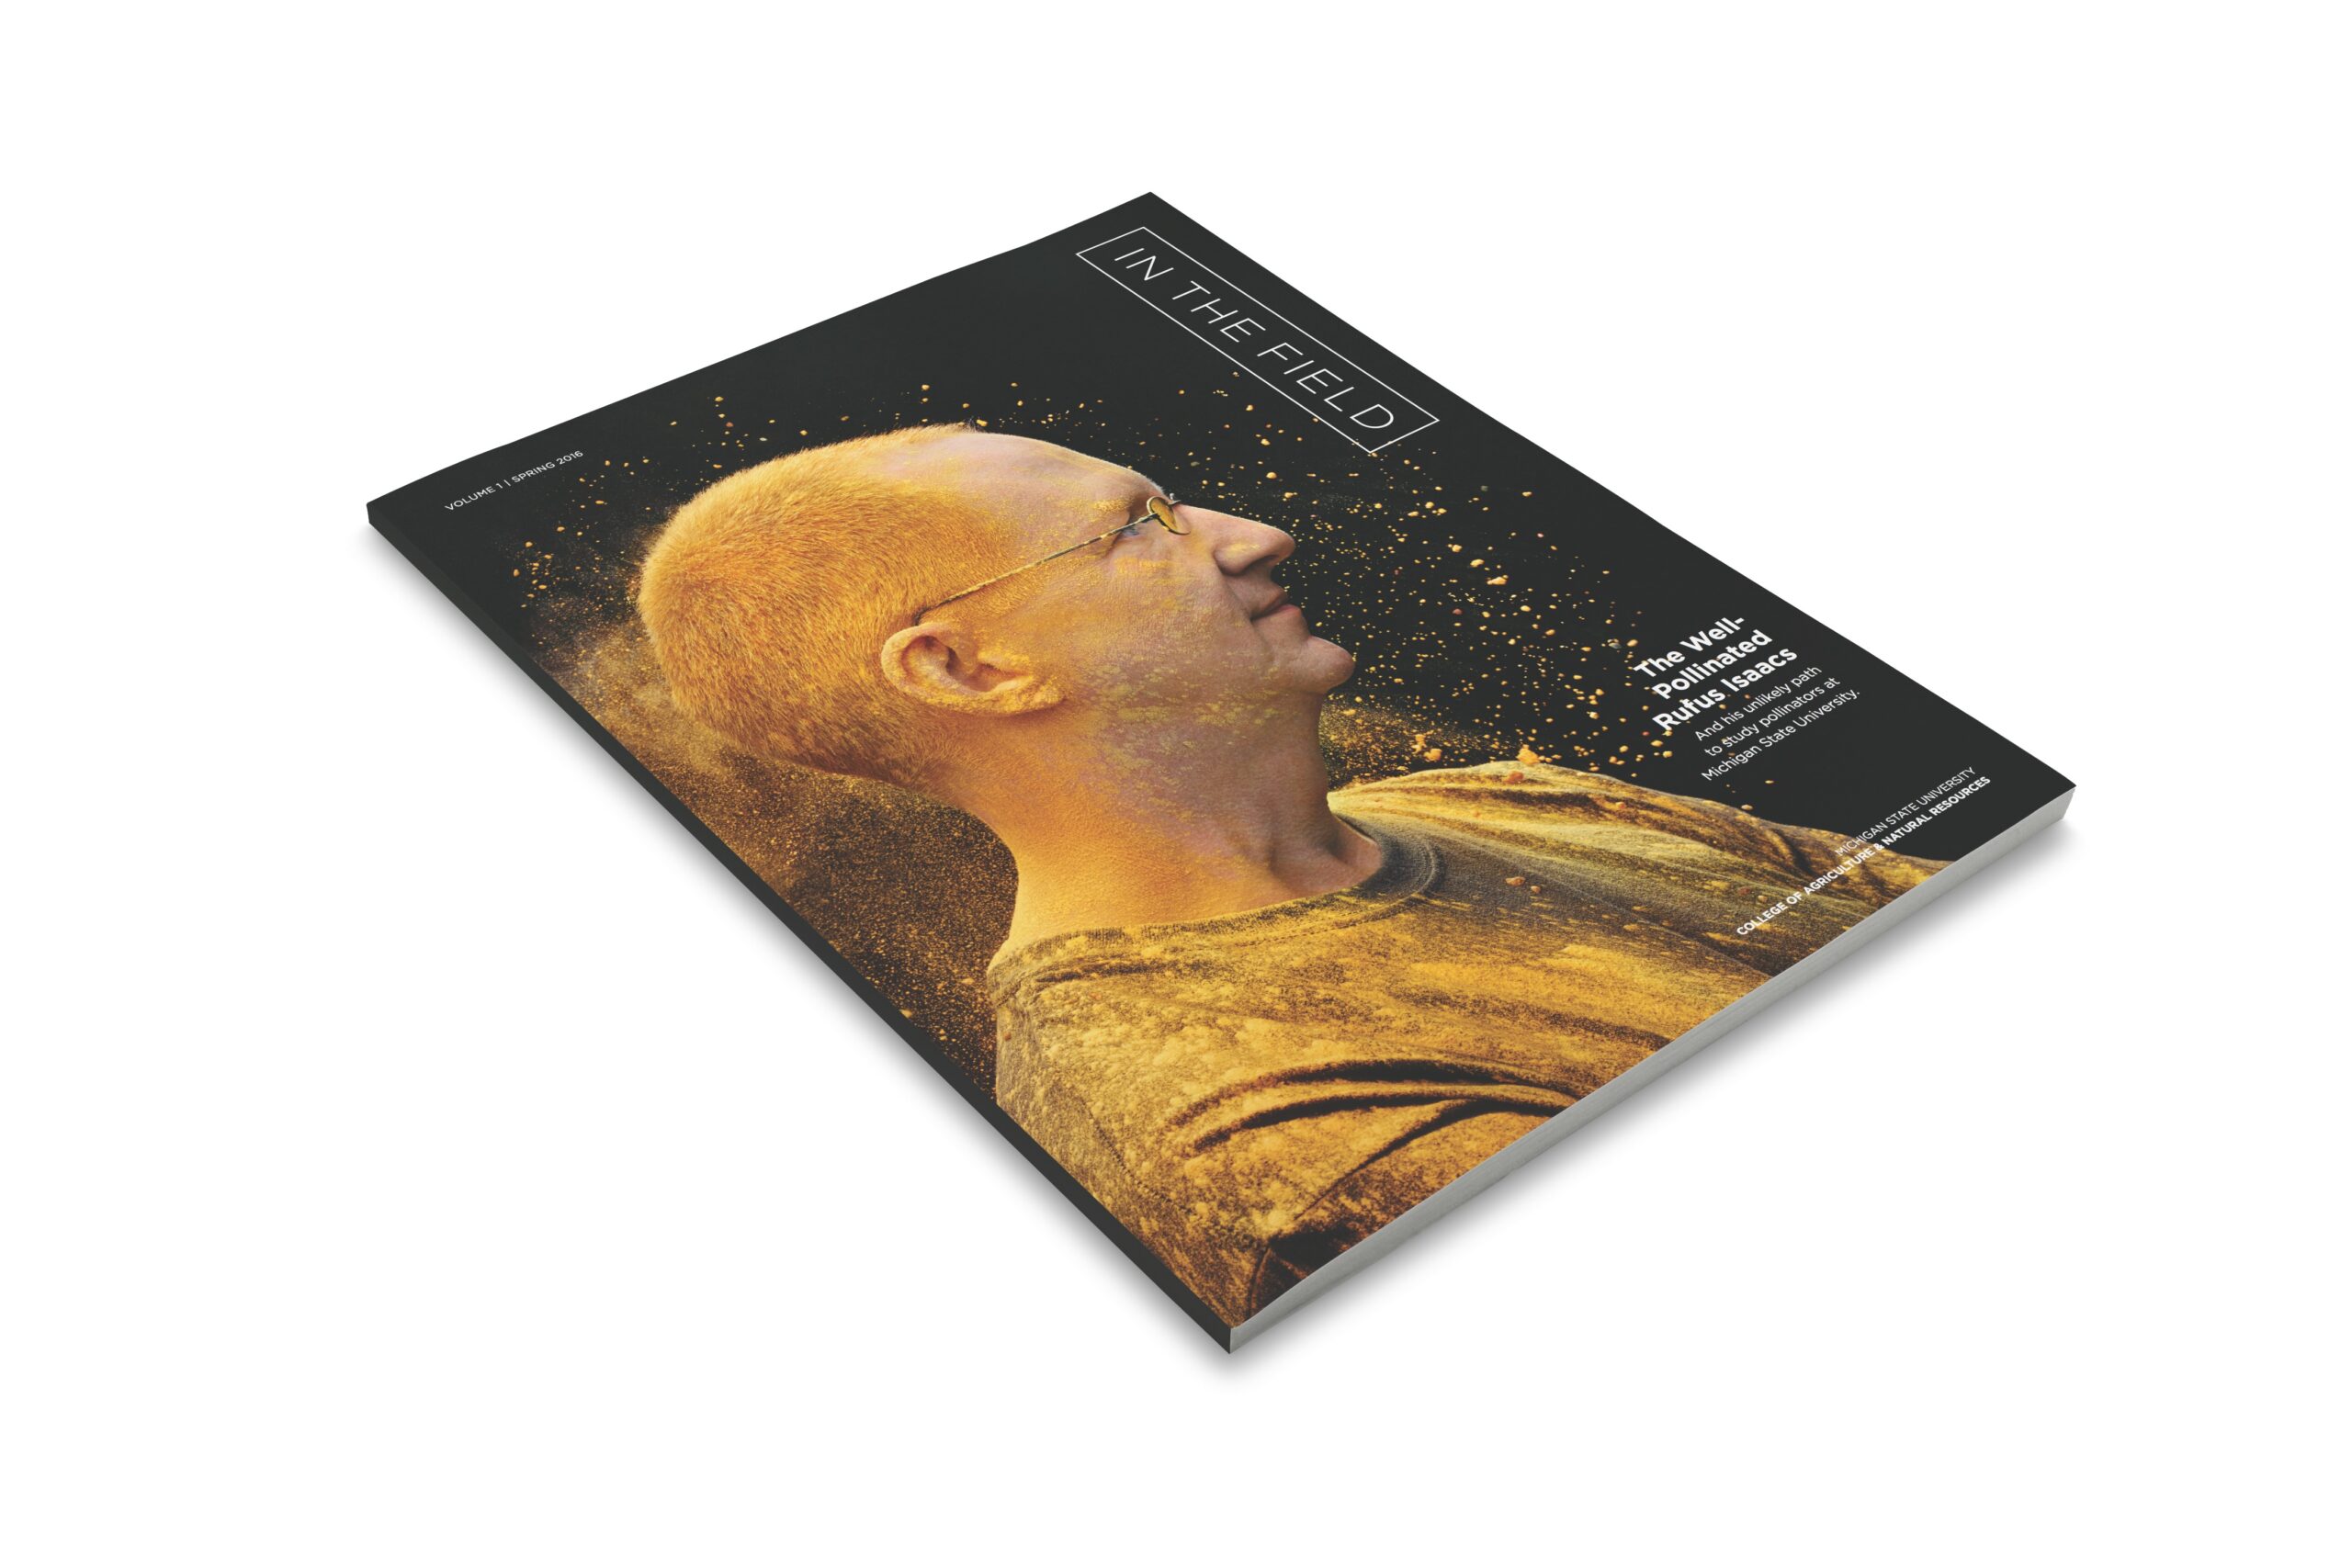 An image of the front cover of In the Field magazine which is a magazine for the College of Agriculture and Natural Resources at Michigan State University. The cover showcases Rufus Issacs, a bee pollen researcher with what looks like bee pollen surrounding his head.